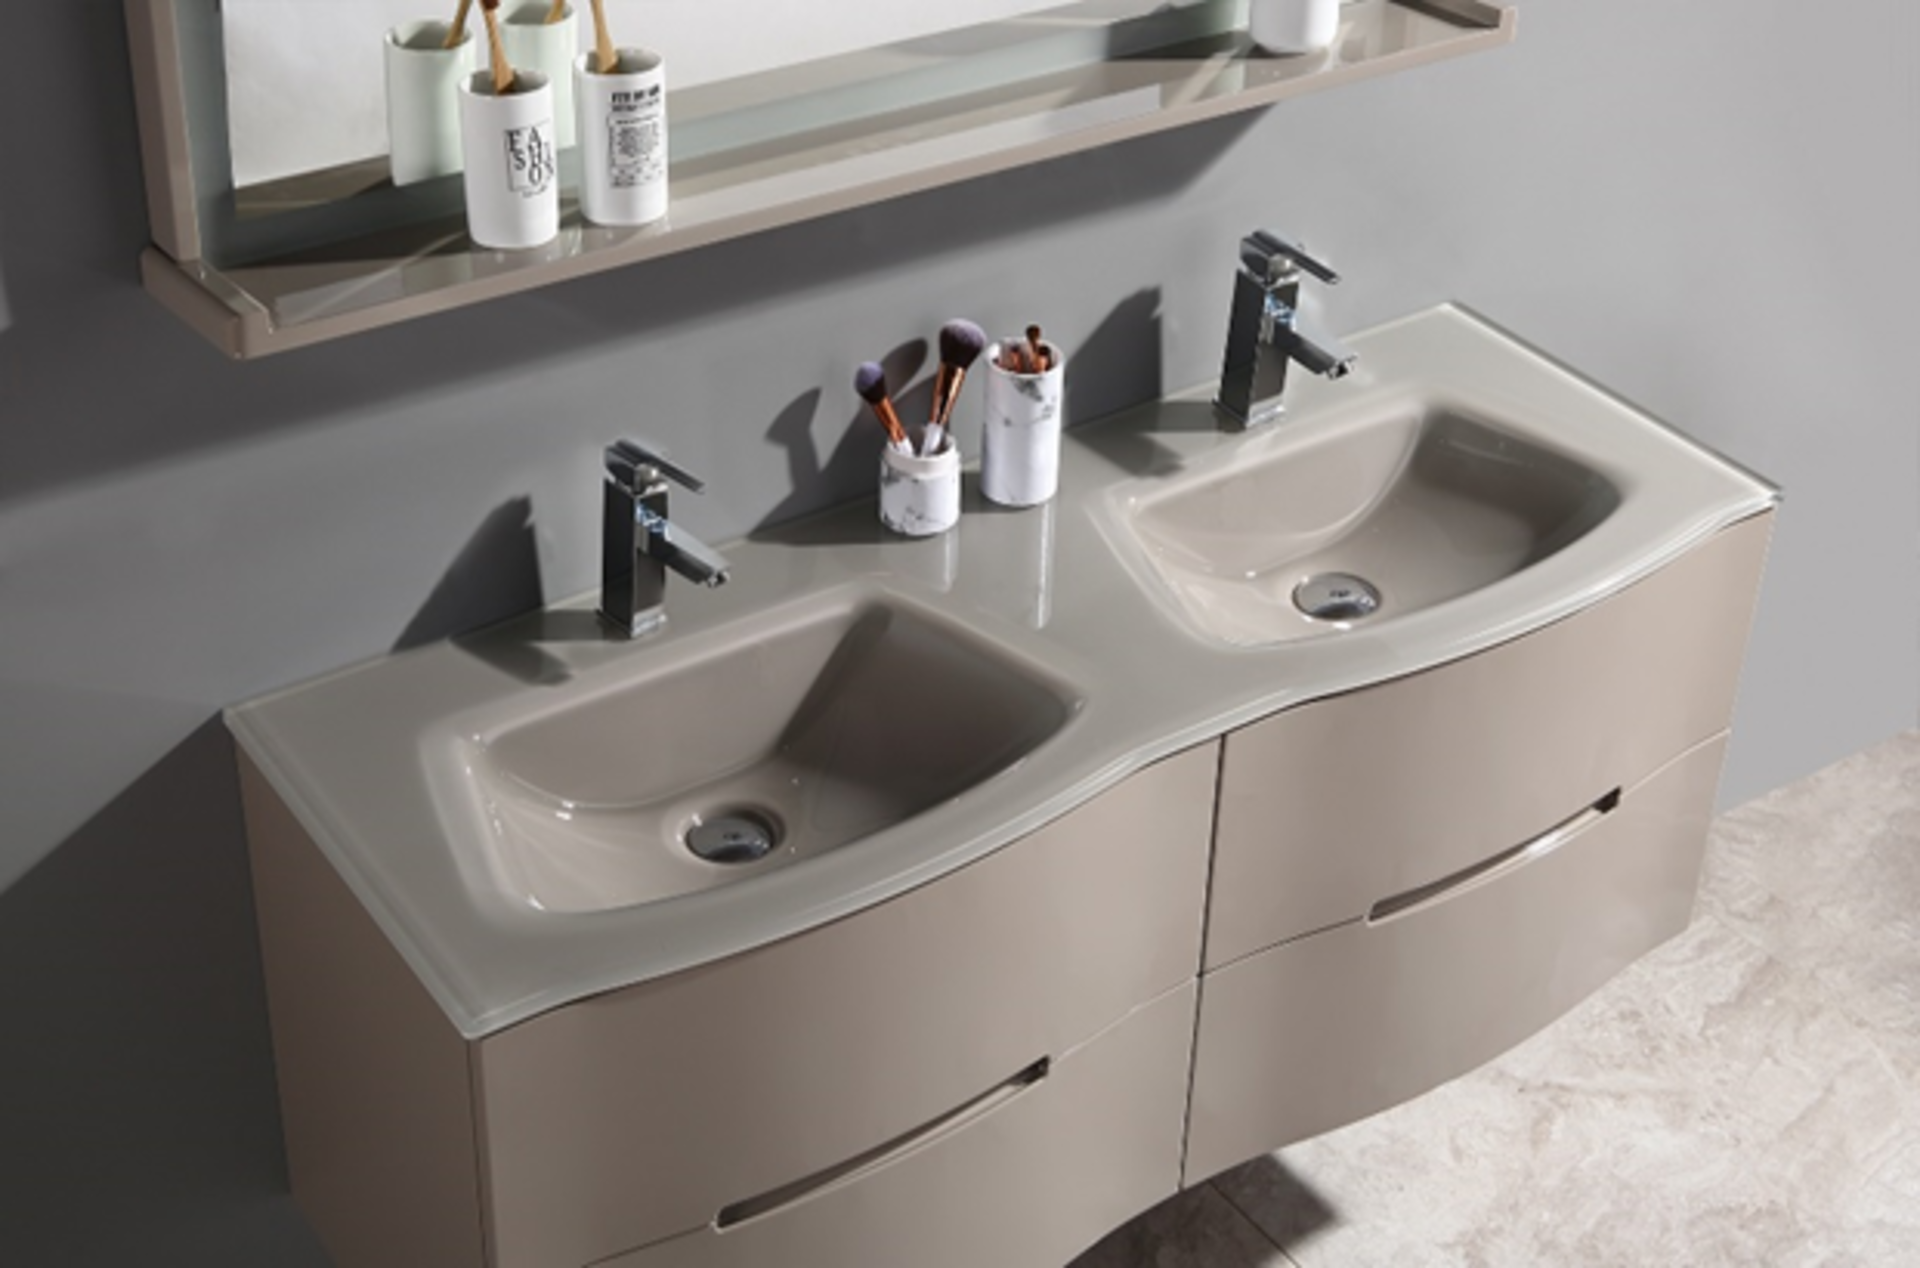 Miura His & Hers Vanity Unit Double Glass Basin Sink Bathroom LED Mirror - Image 2 of 3